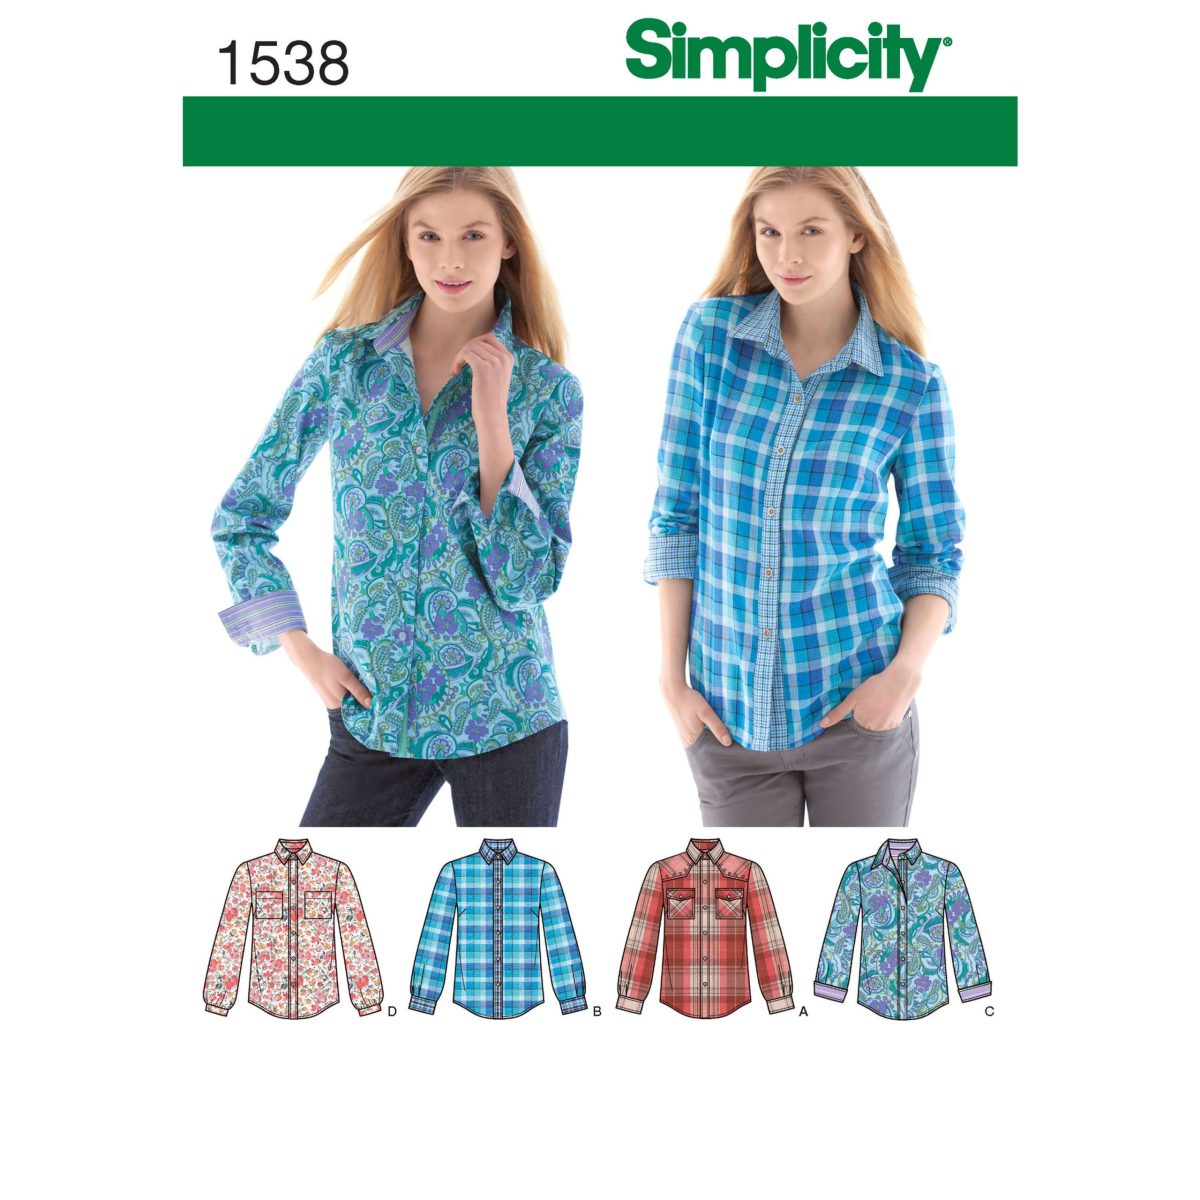 Simplicity Sewing Pattern 1538 Misses' Button Front Shirt sizes 6 - 22